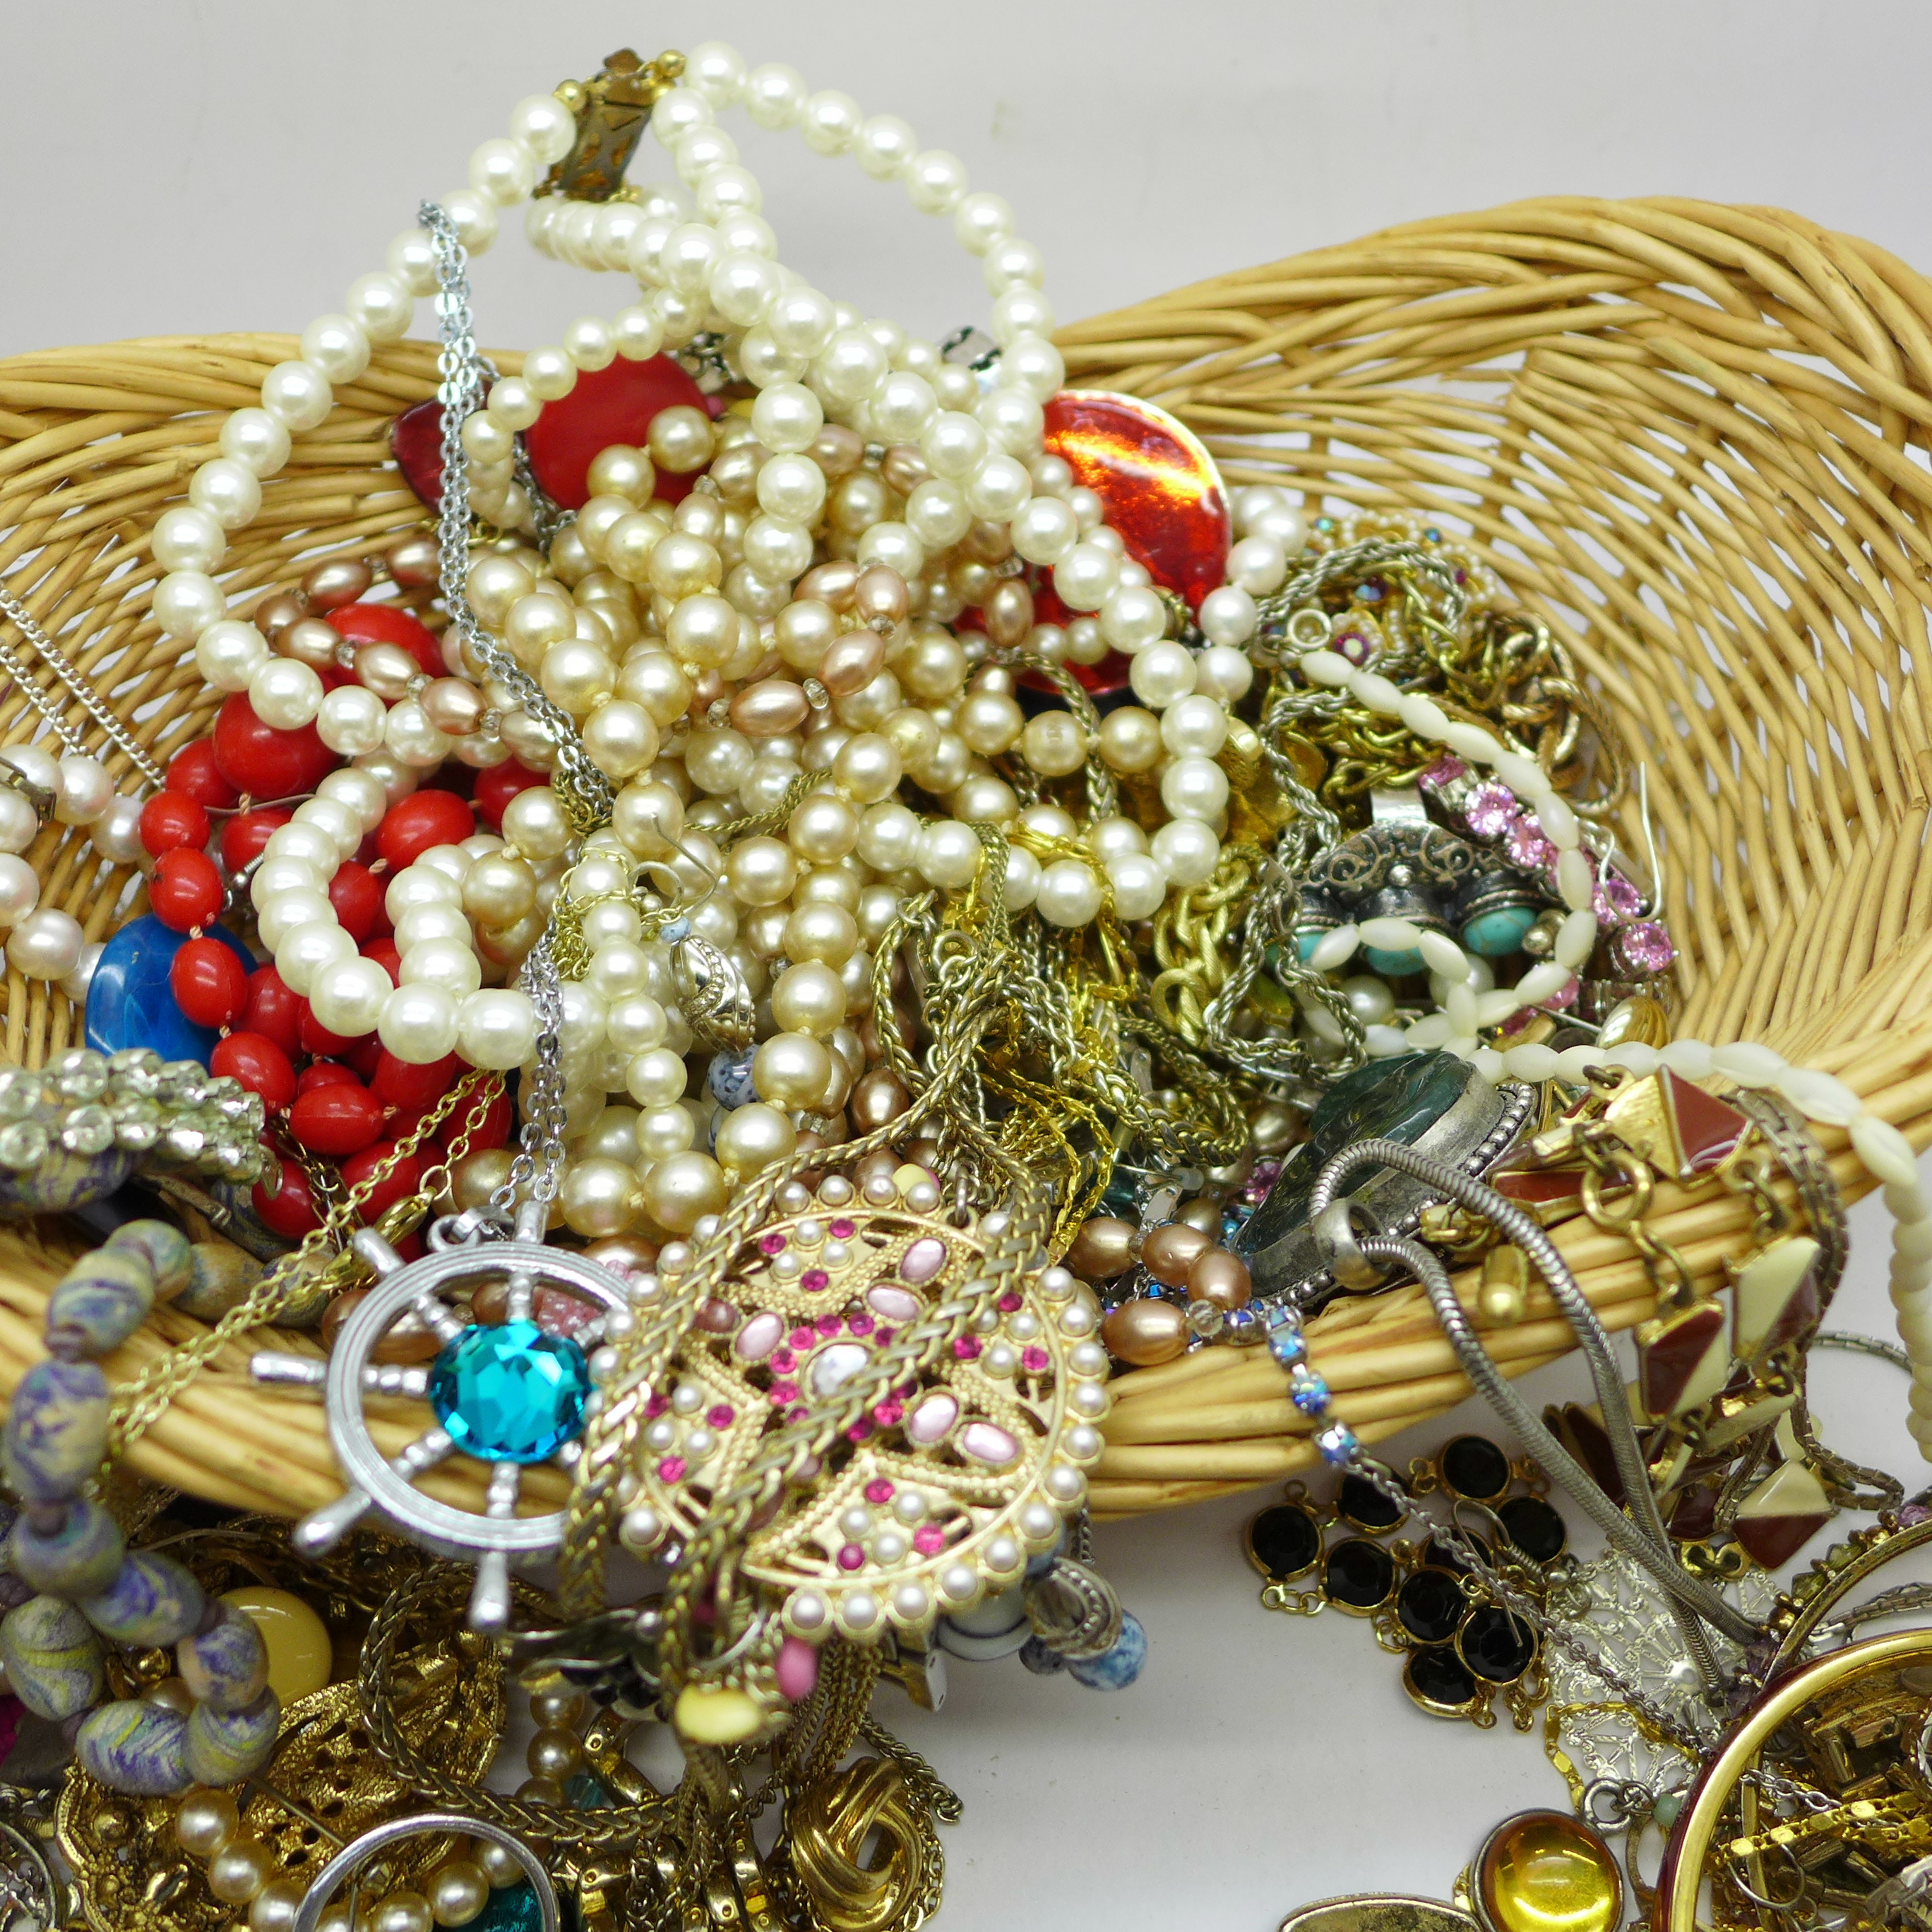 A basket of costume jewellery - Image 6 of 6